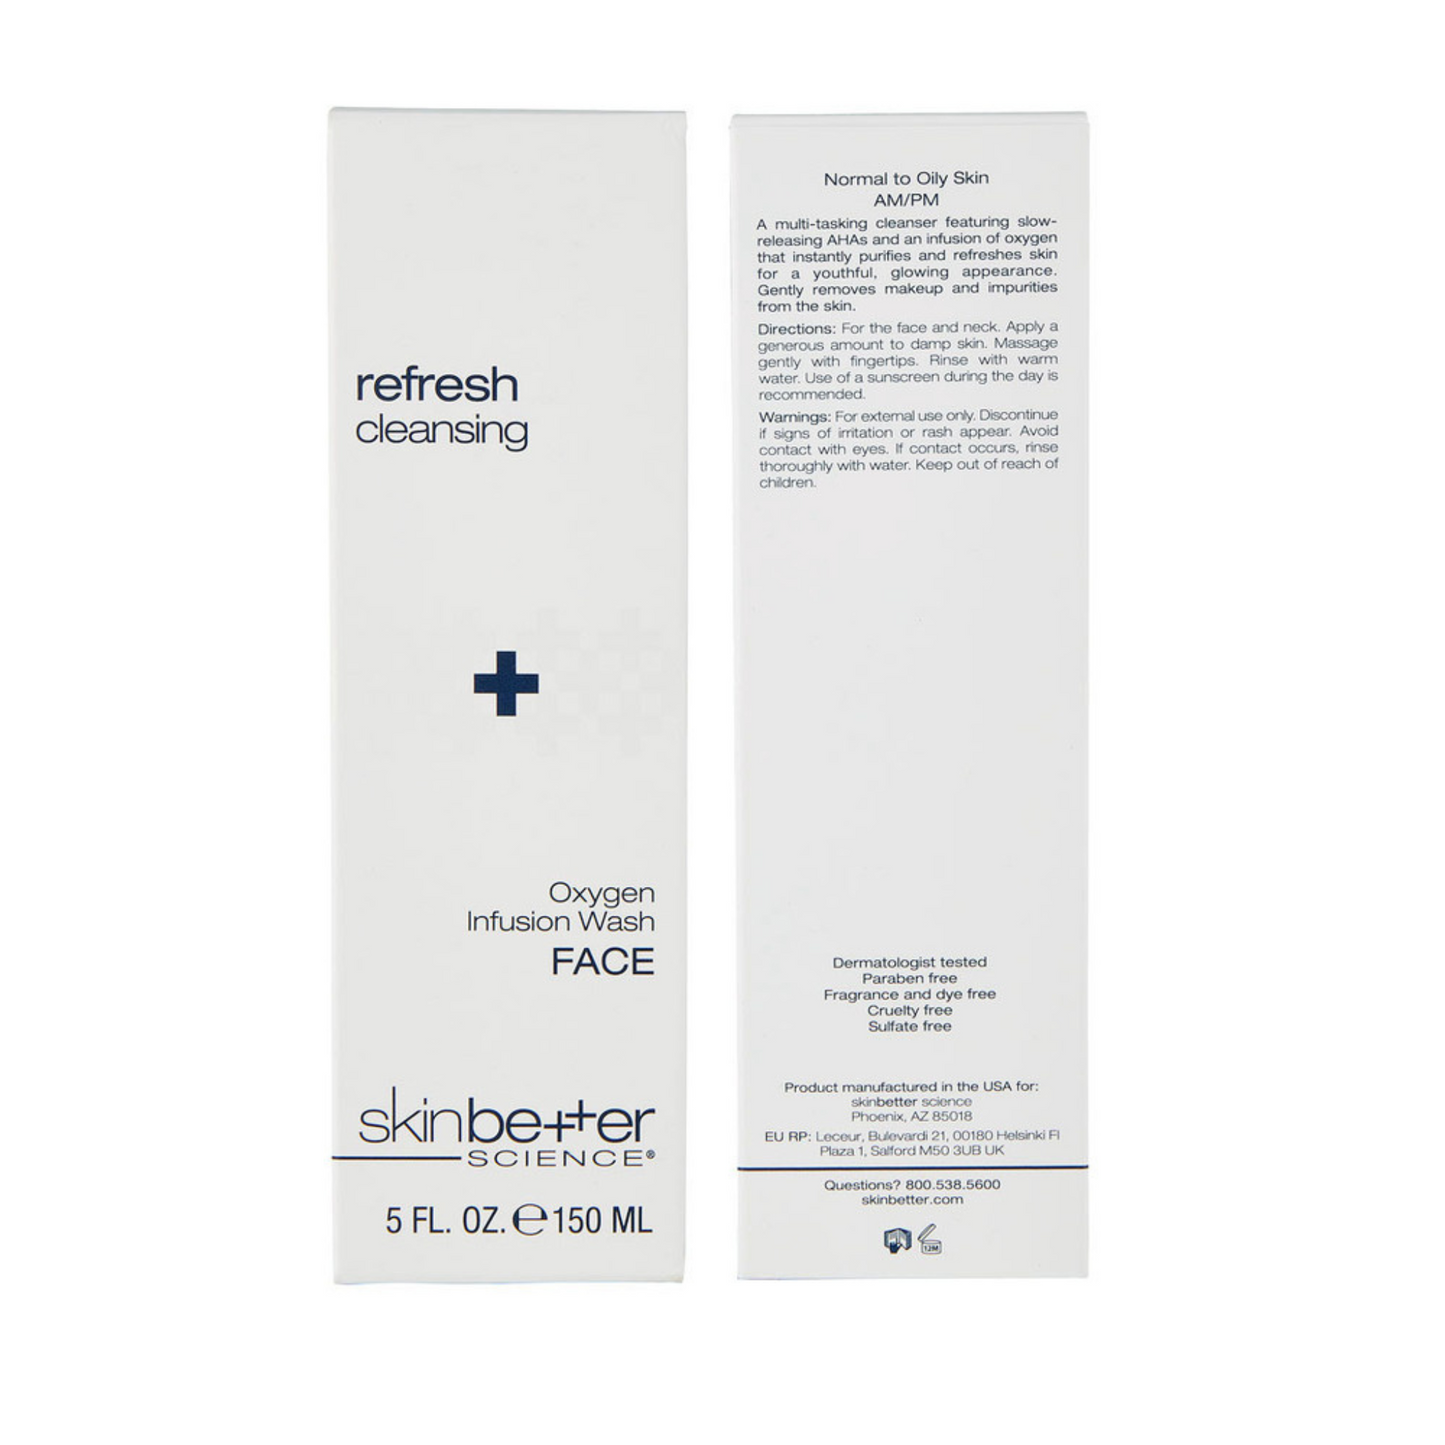 Oxygen Infusion Wash | skinbetter science®